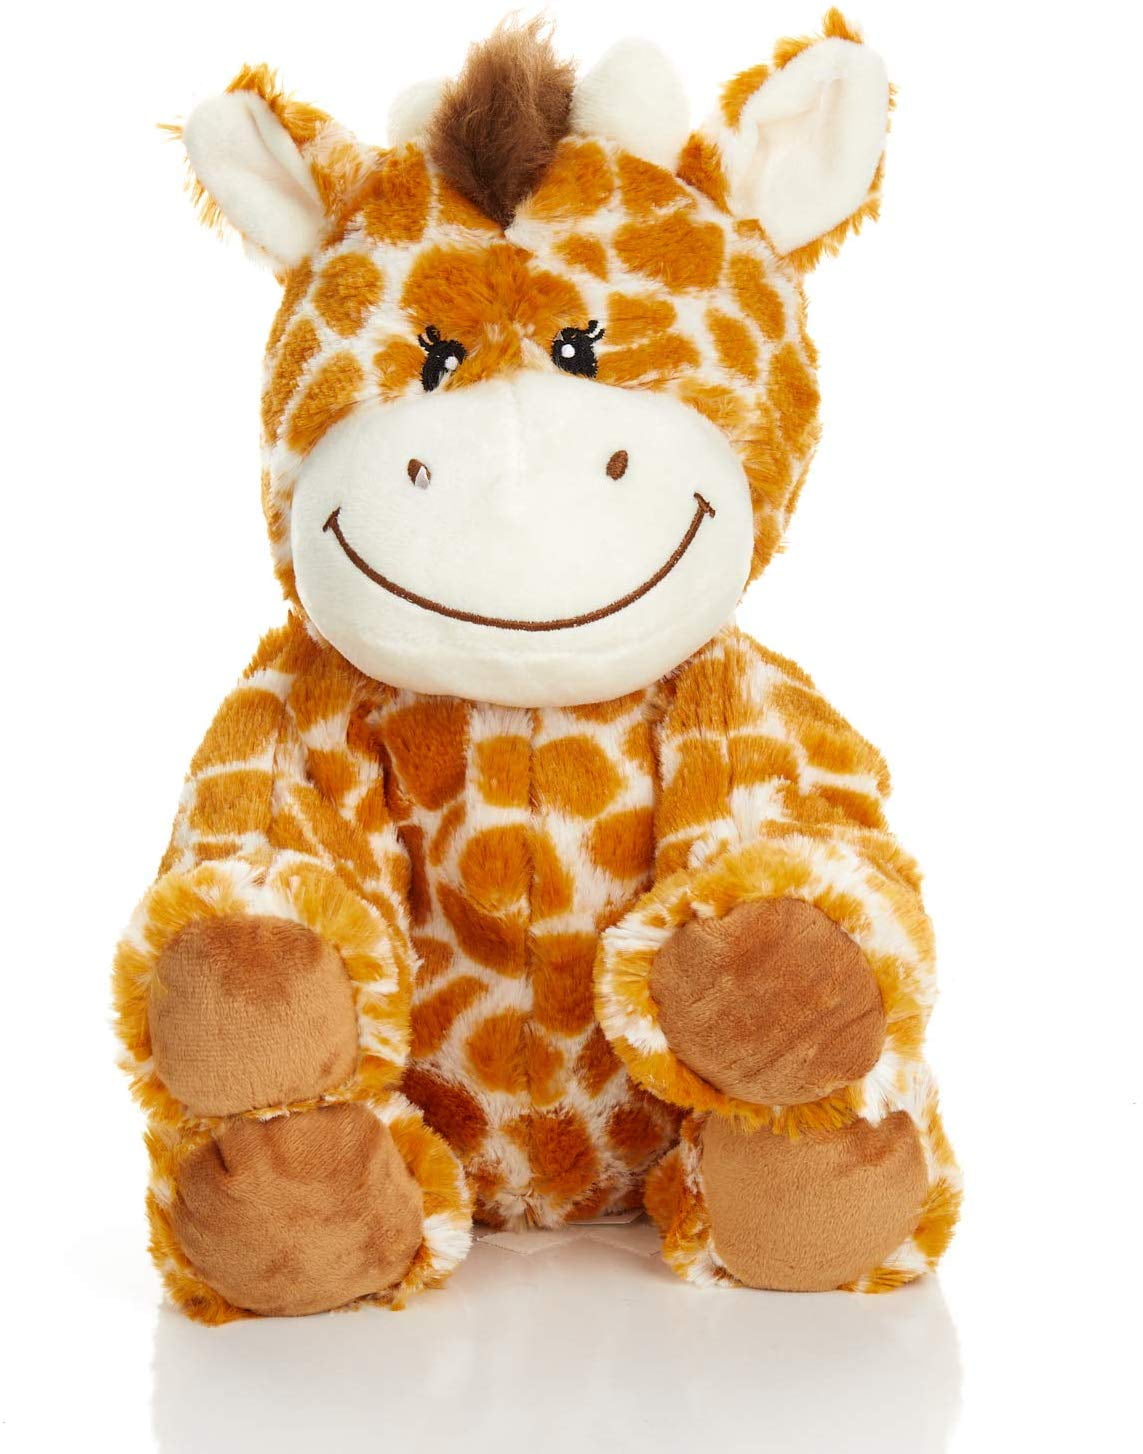 GARY THE GIRAFFE  BNWT 13-14" CUDDLE & SQUEEZE ME TOY SLOW RISE 